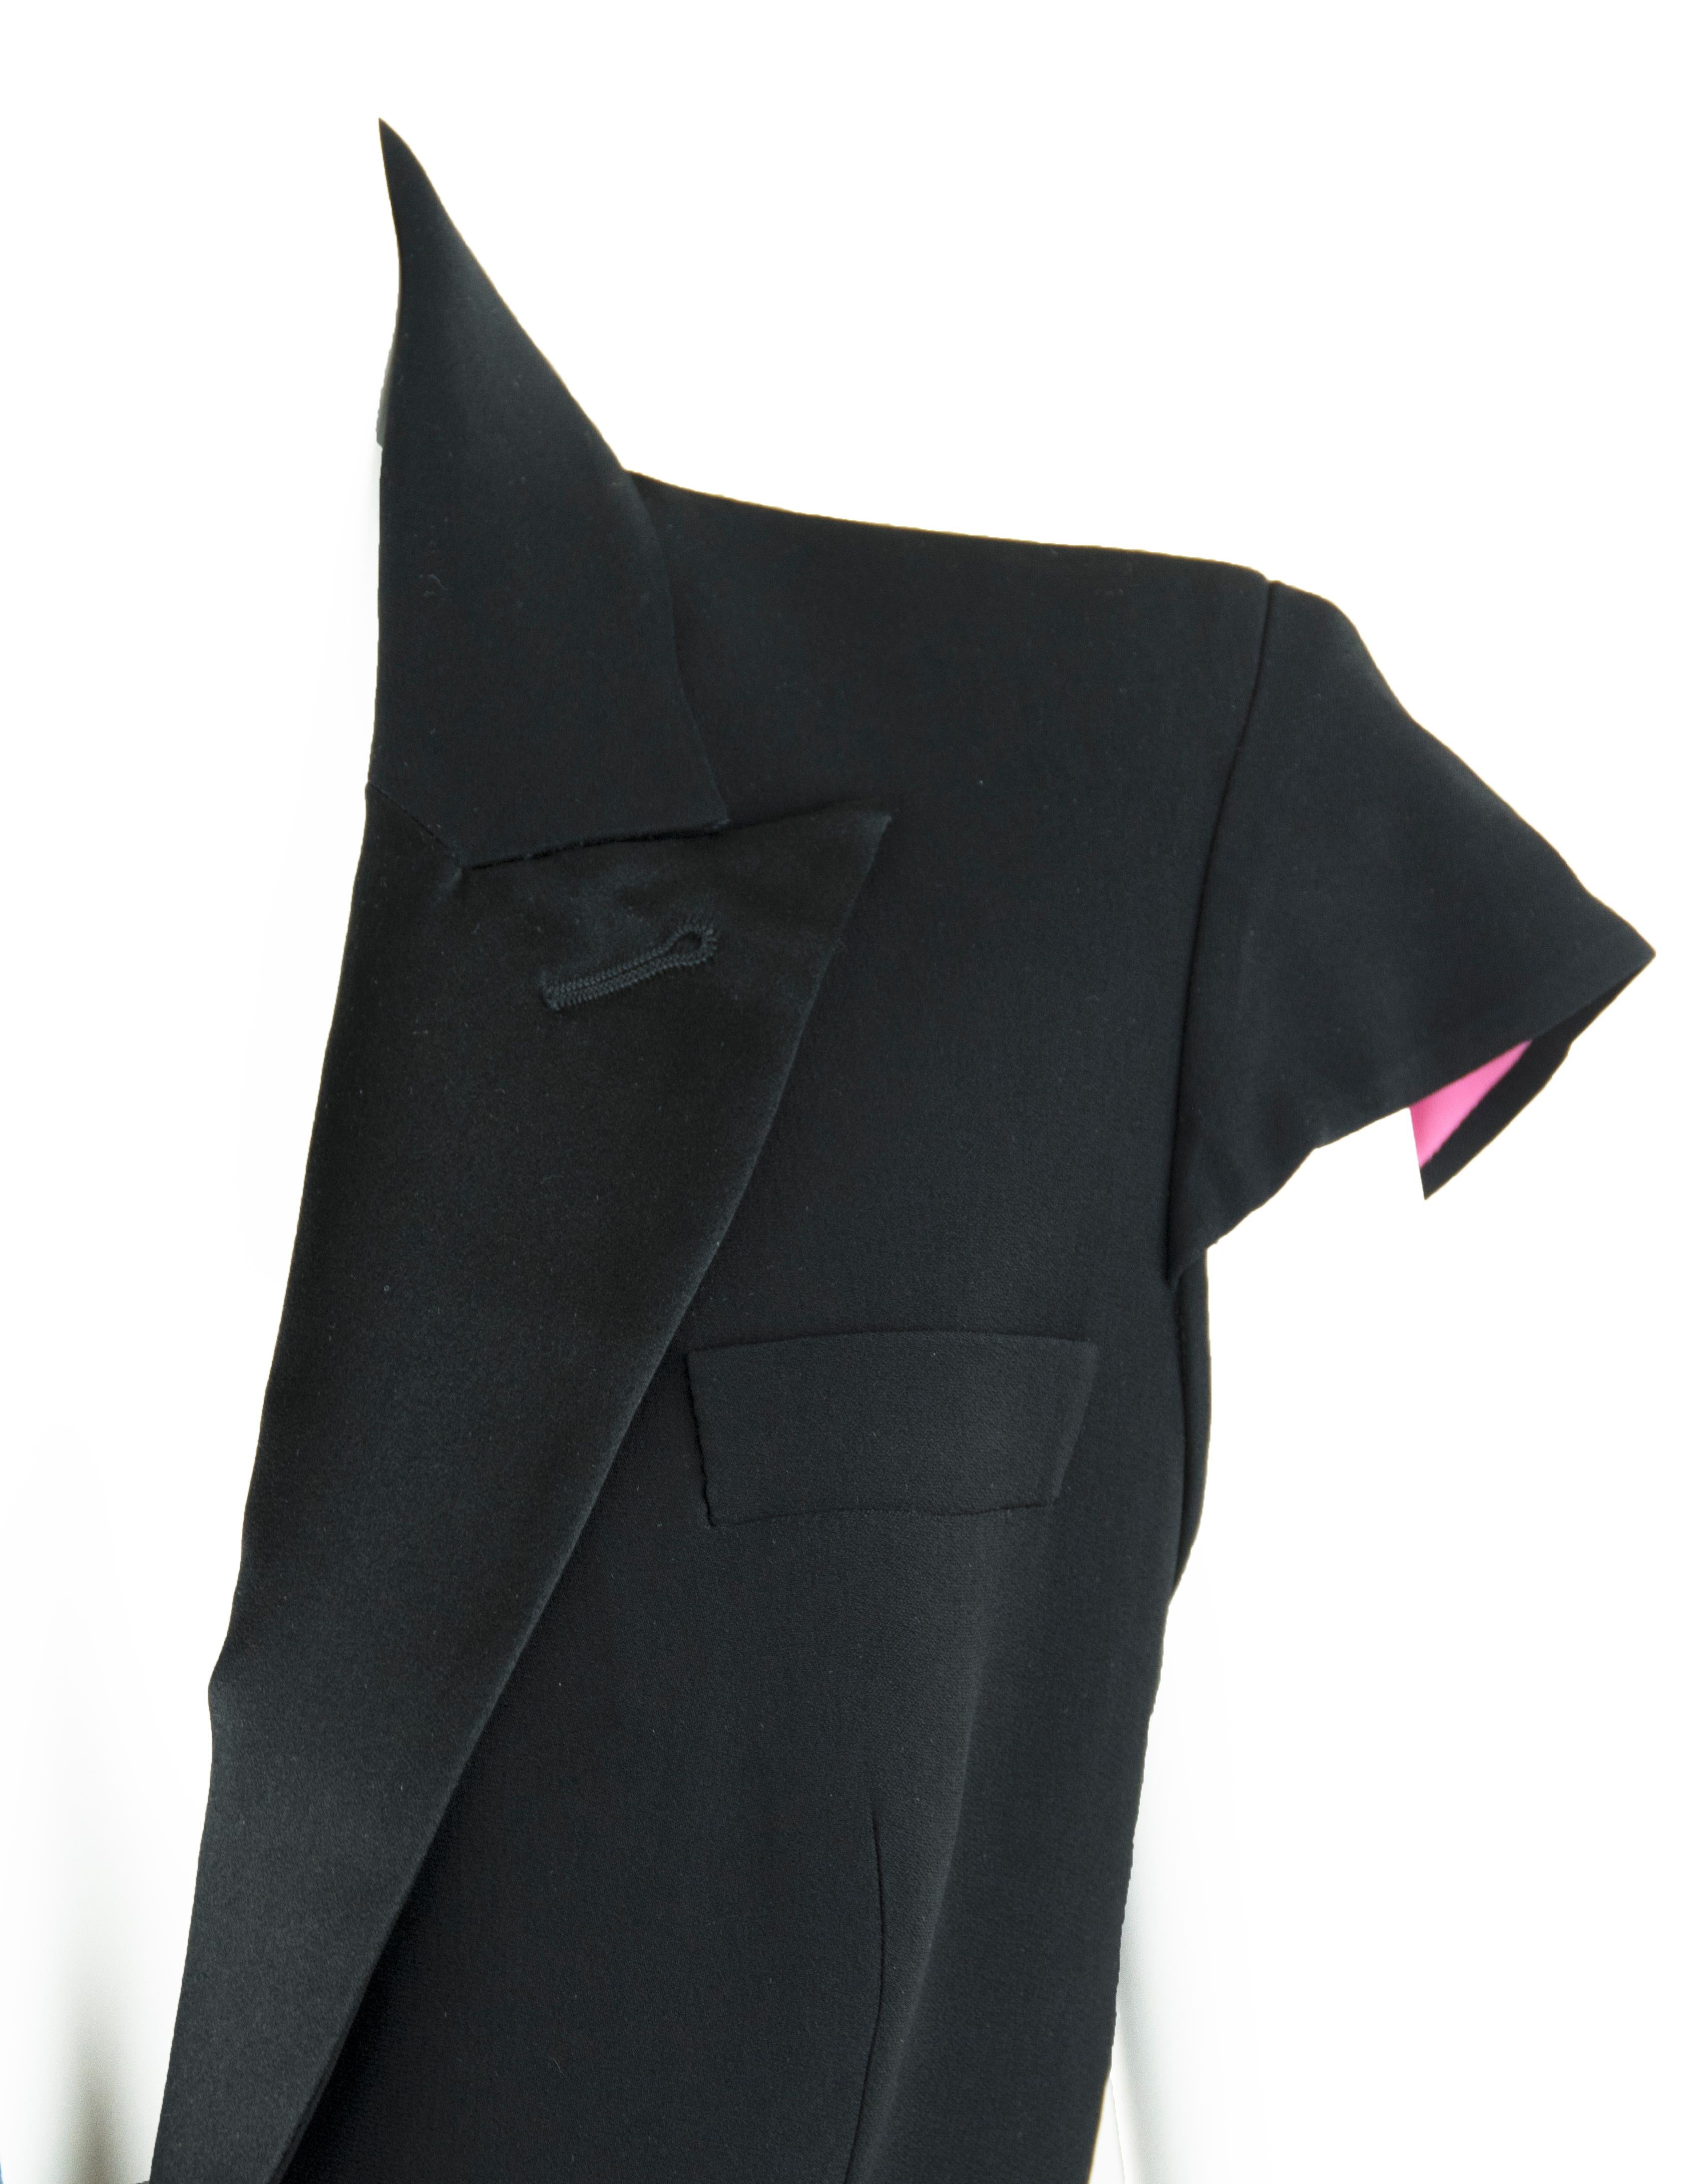 Alexander McQueen Black Jumpsuit with Satin Lapel Spring 2008 Collection In Excellent Condition For Sale In Newport, RI